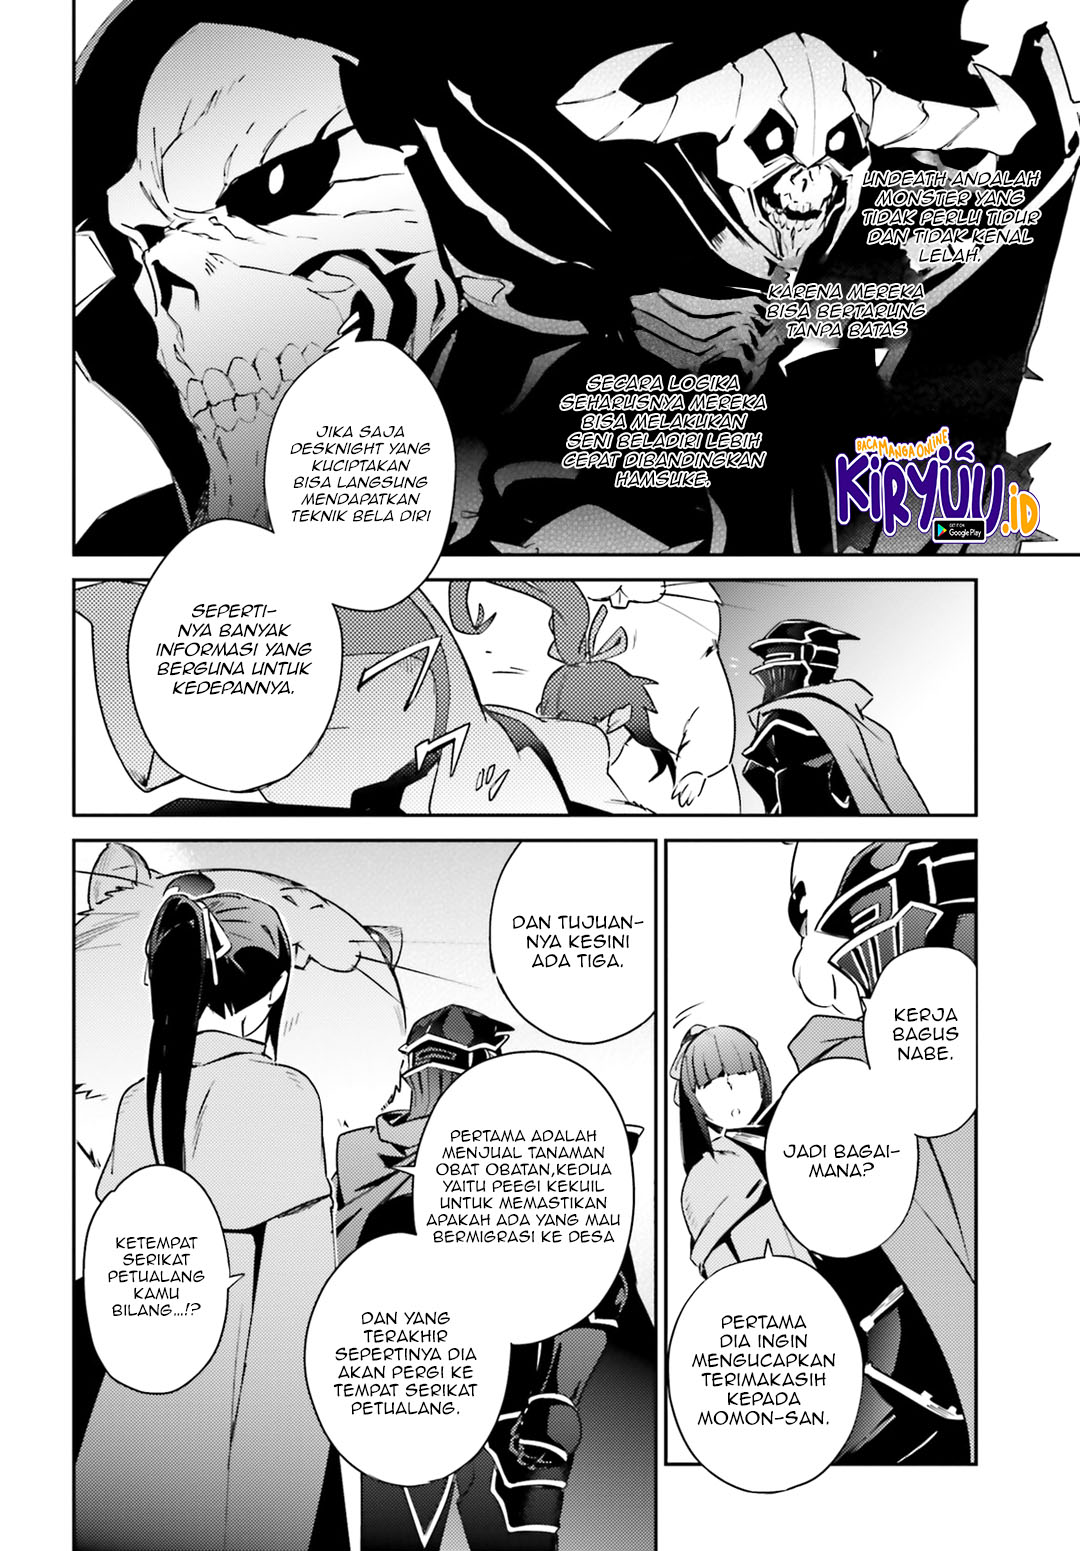 Overlord Chapter 56 26